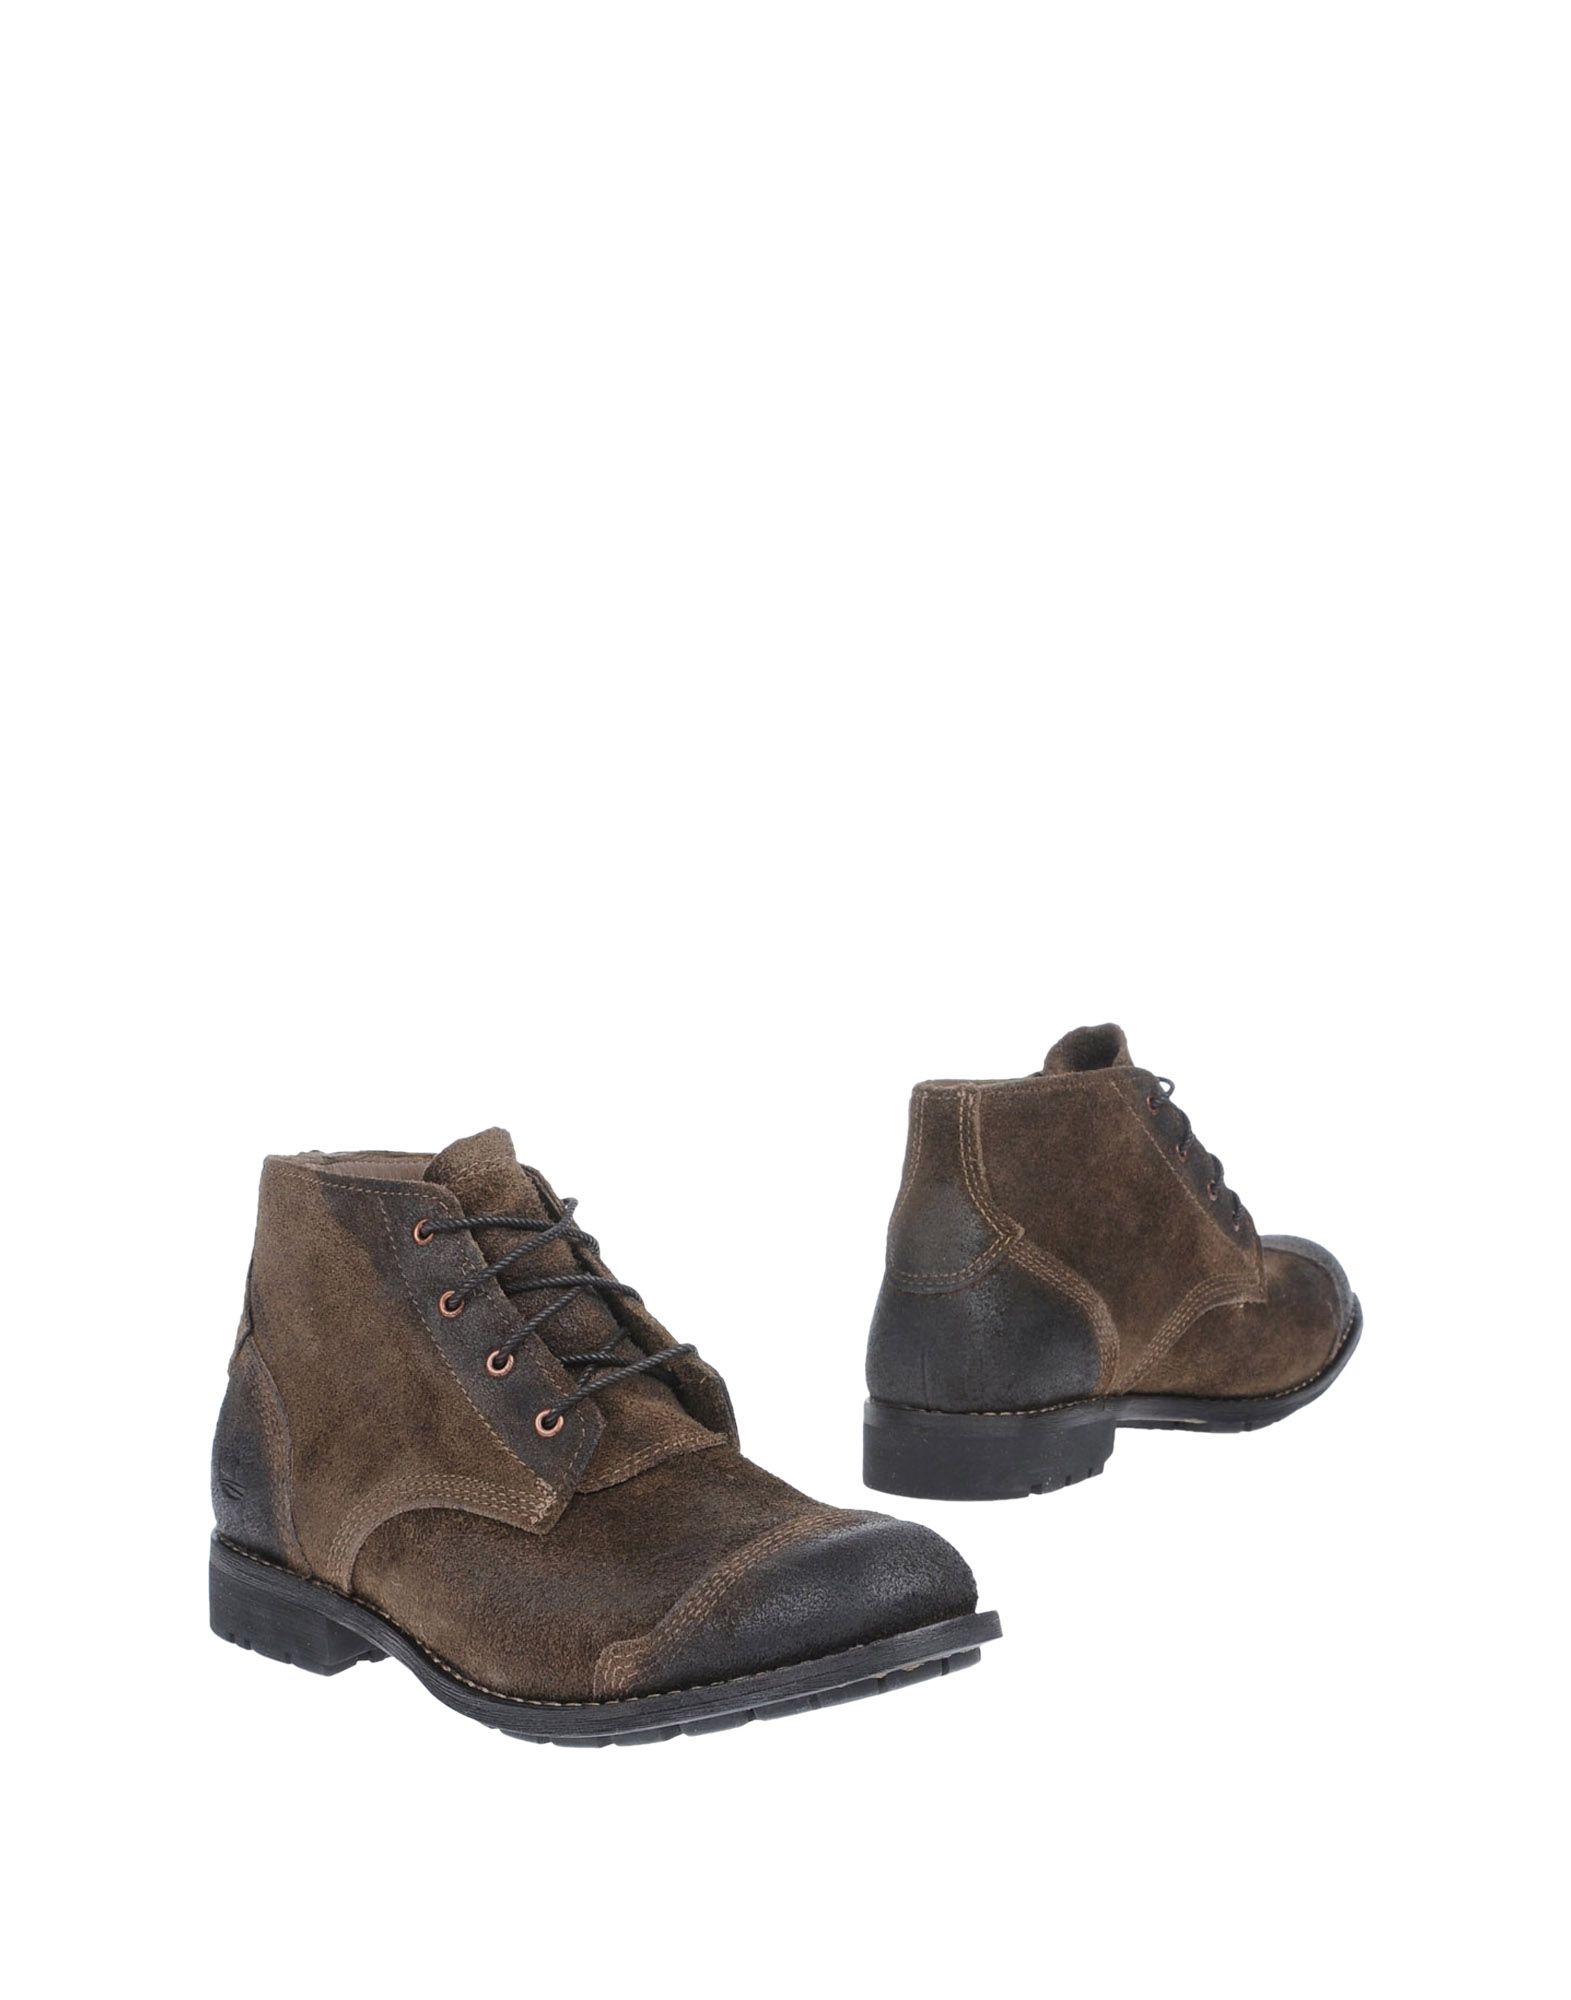 Foto Earthkeepers By Timberland Botas Con Cordones Hombre Caqui